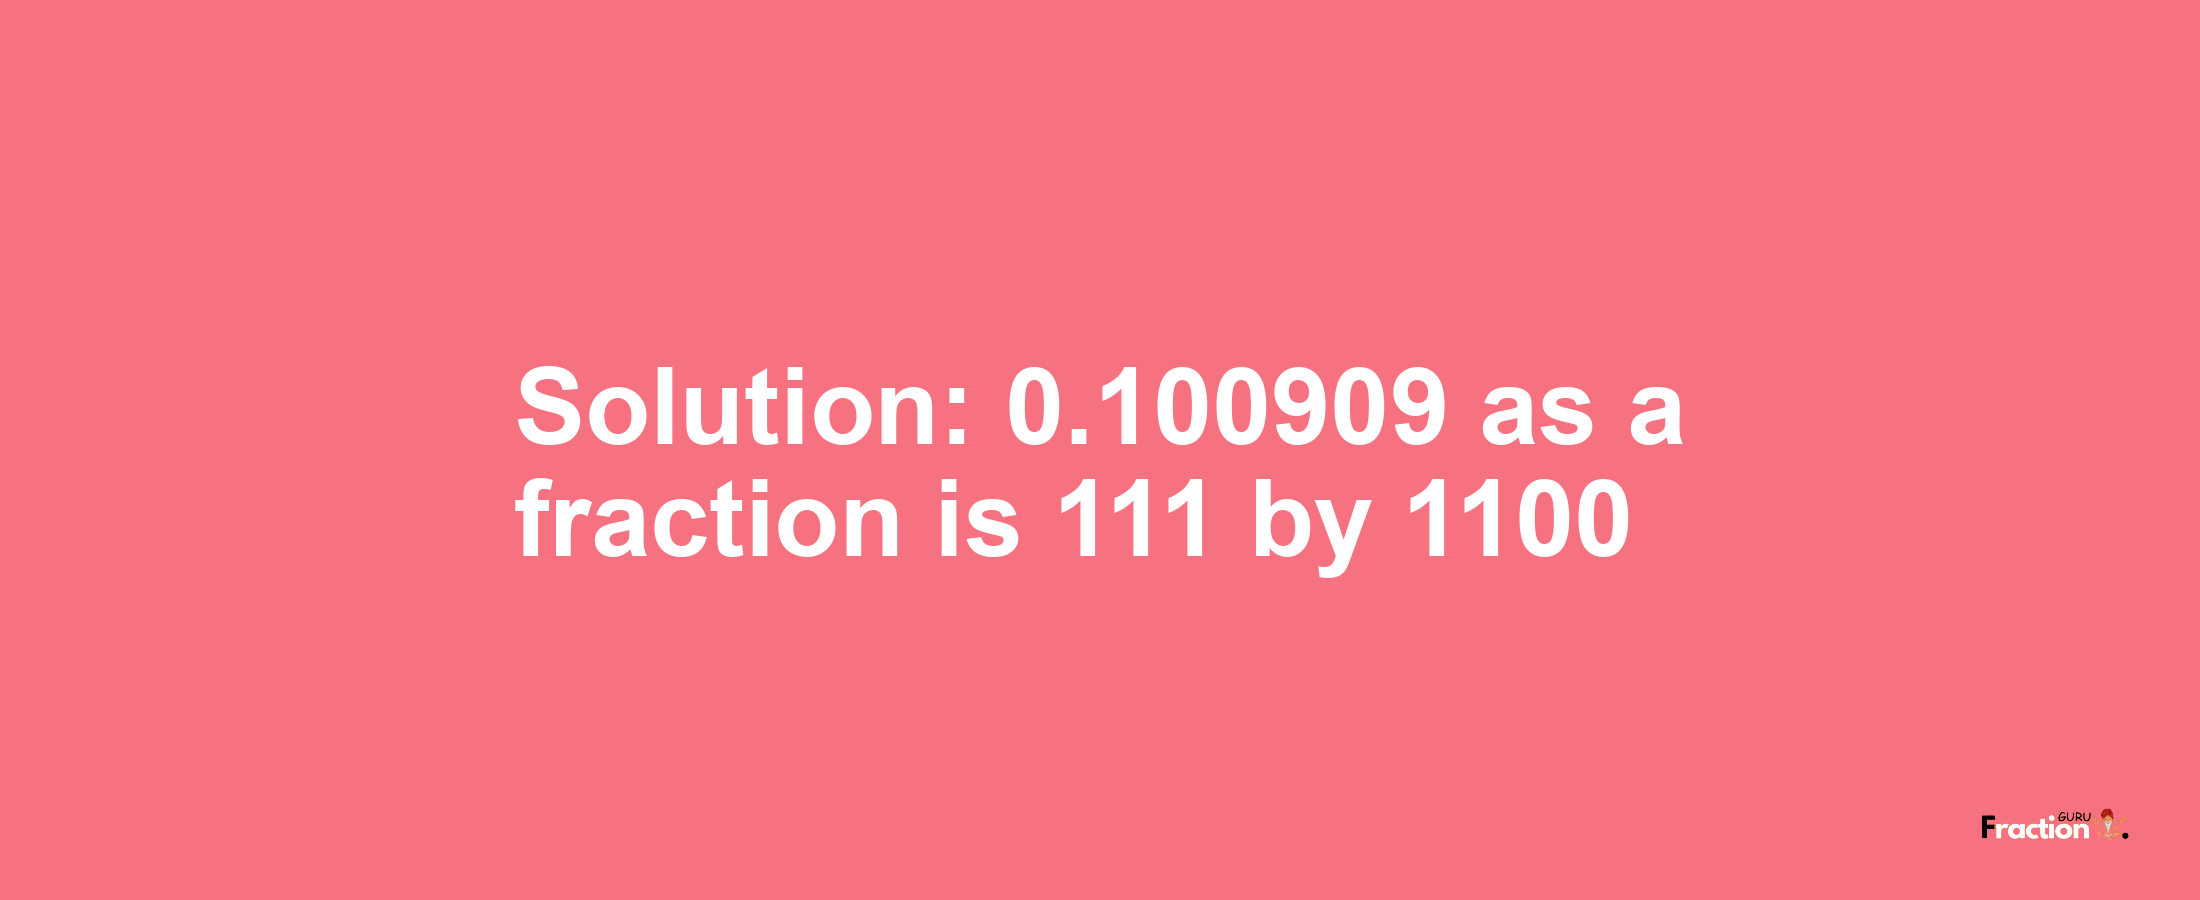 Solution:0.100909 as a fraction is 111/1100